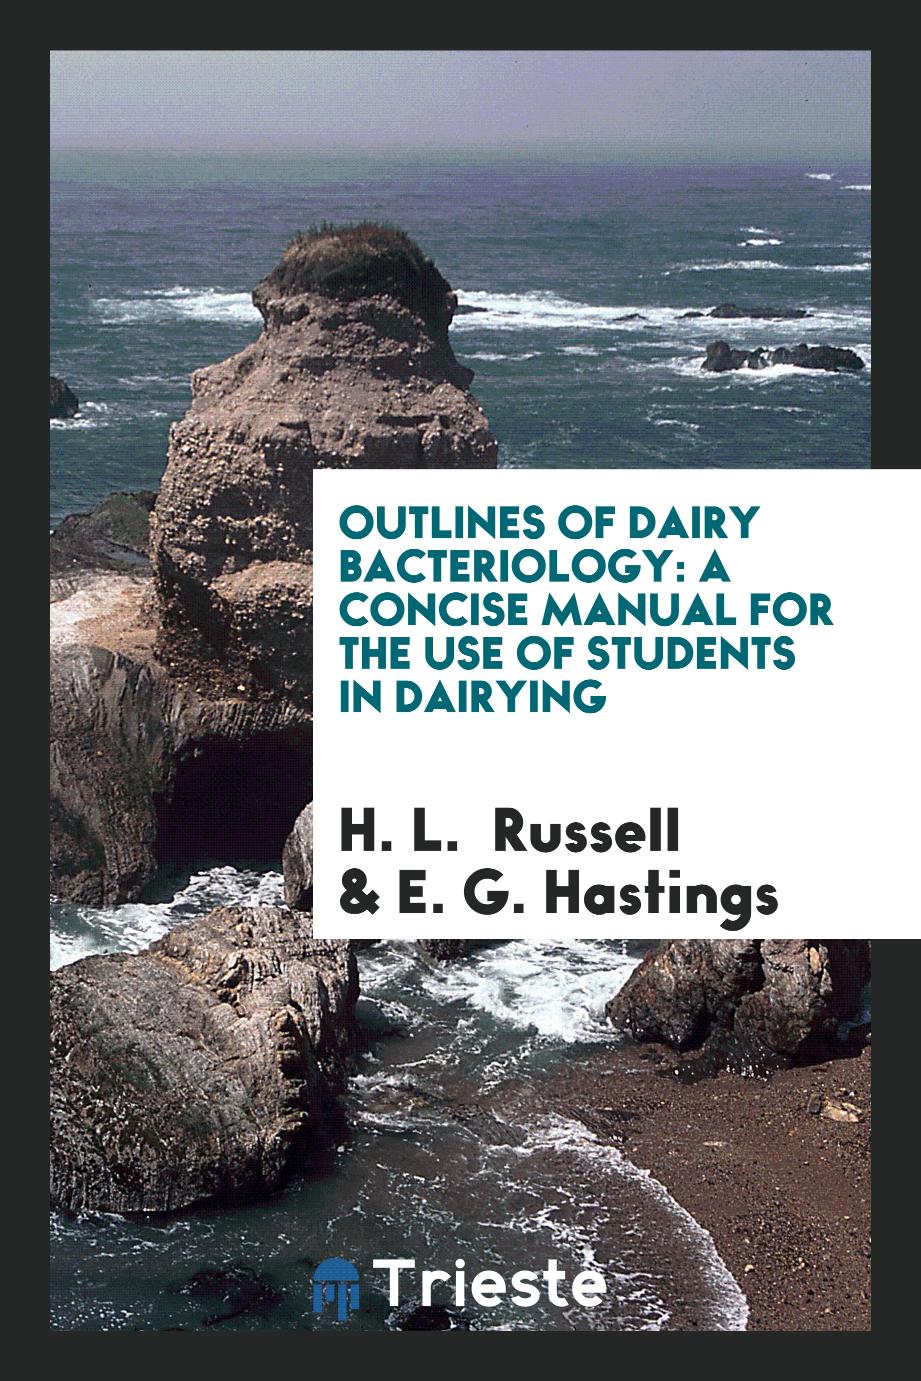 Outlines of Dairy Bacteriology: A Concise Manual for the Use of Students in Dairying